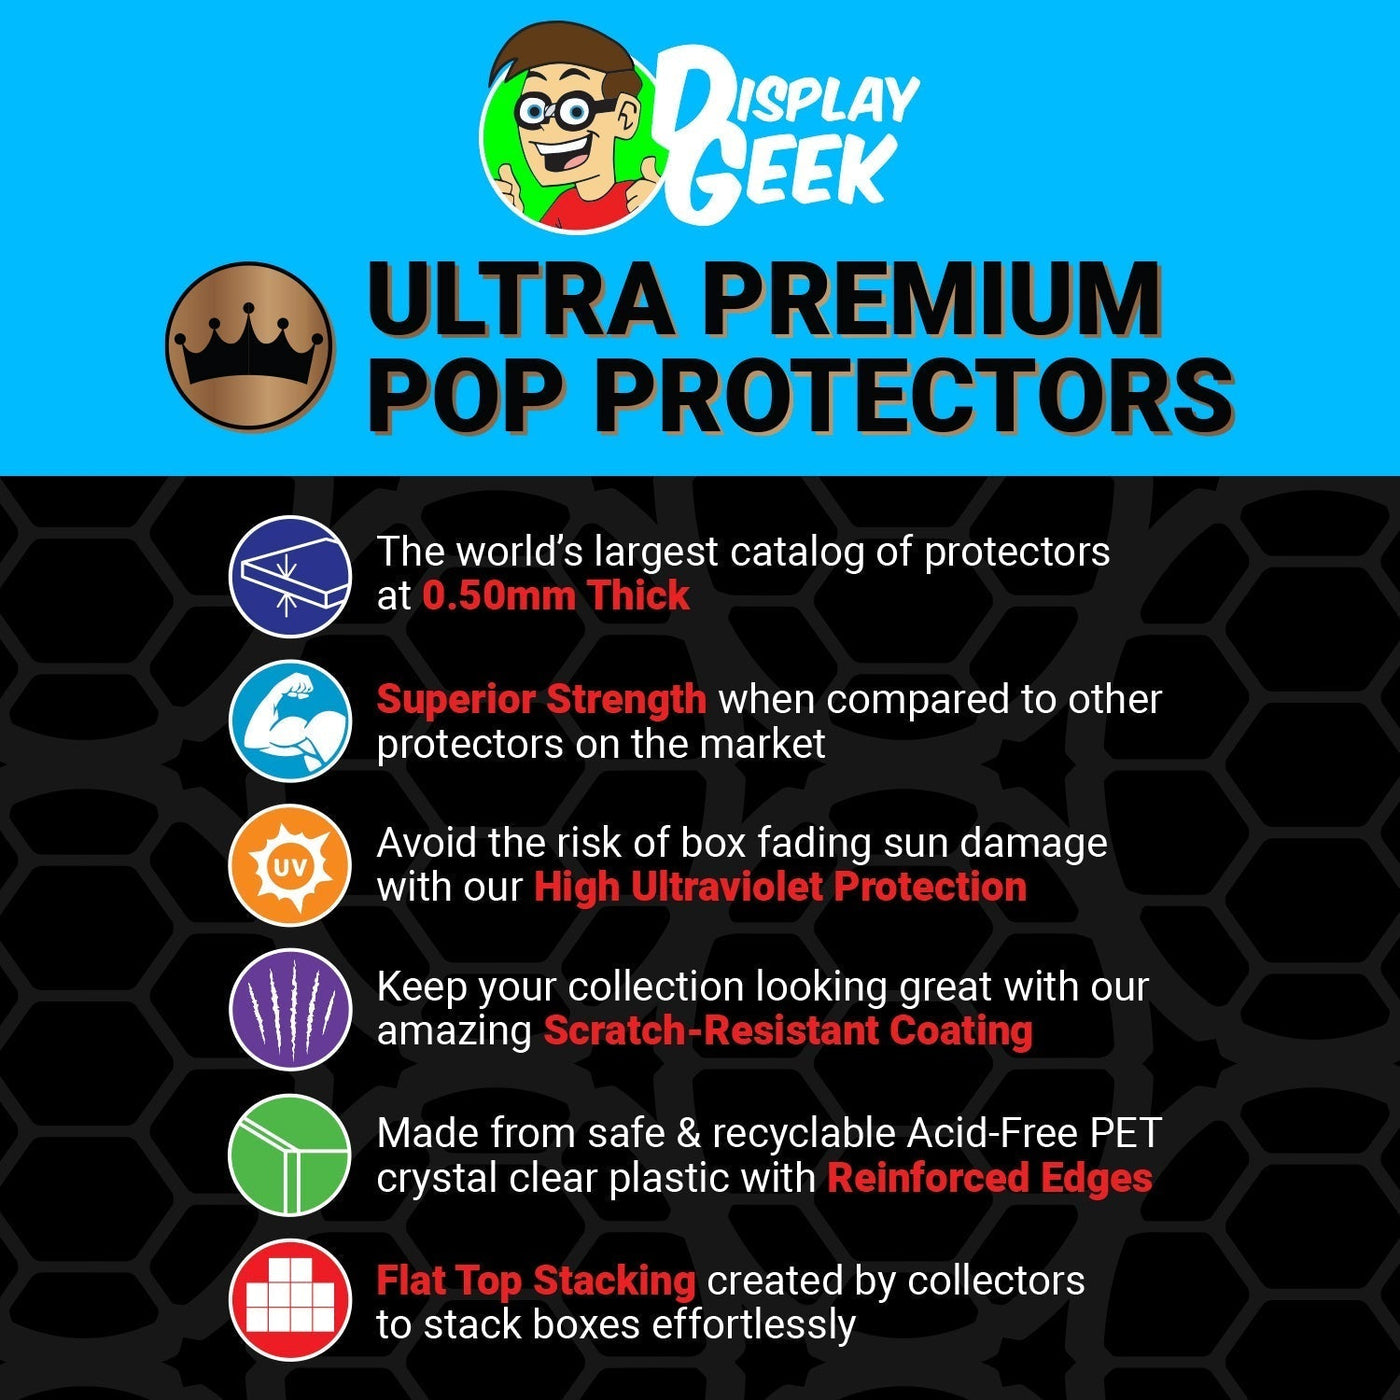 Pop Protector for 2 Pack Tom & Jean-Ralphio ECCC Funko Pop on The Protector Guide App by Display Geek